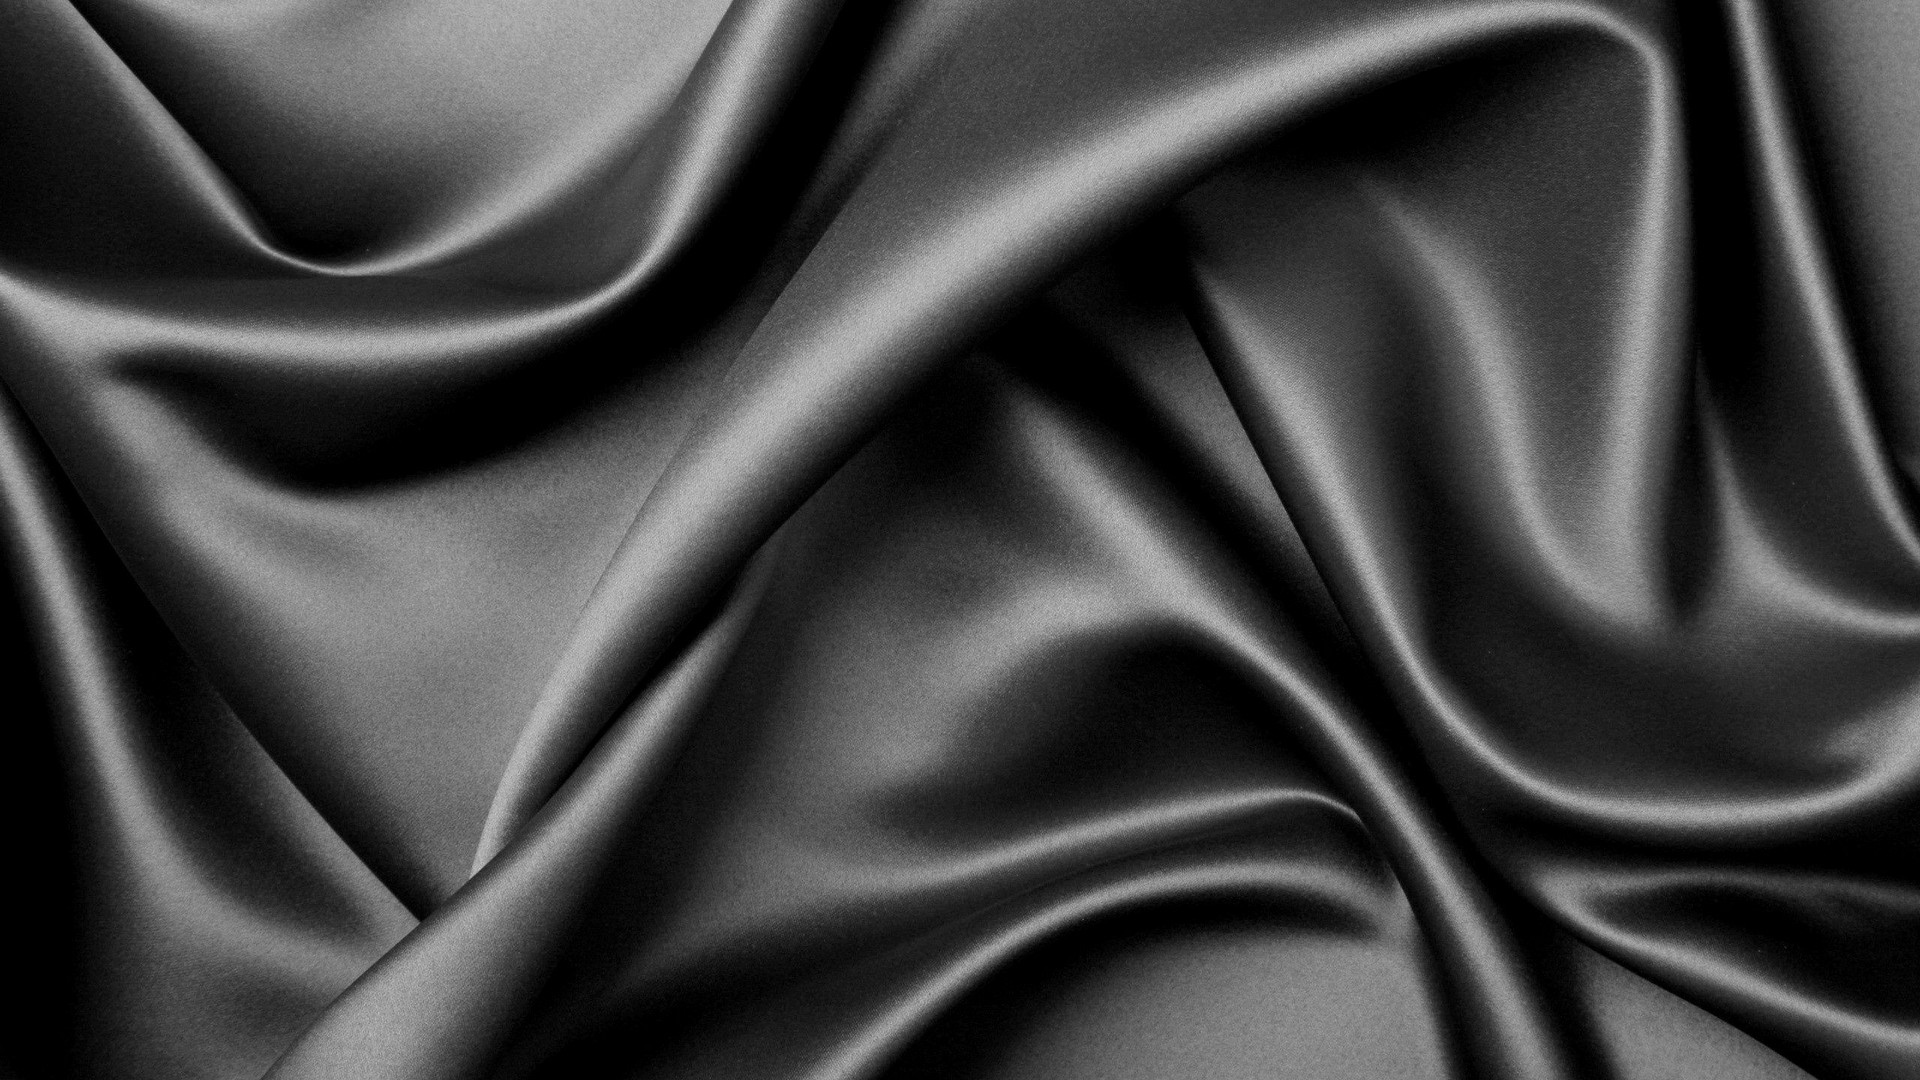 Black Silk iPhone Wallpaper Lock Screen with high-resolution 1920x1080 pixel. You can set as wallpaper for Apple iPhone X, XS Max, XR, 8, 7, 6, SE, iPad. Enjoy and share your favorite HD wallpapers and background images